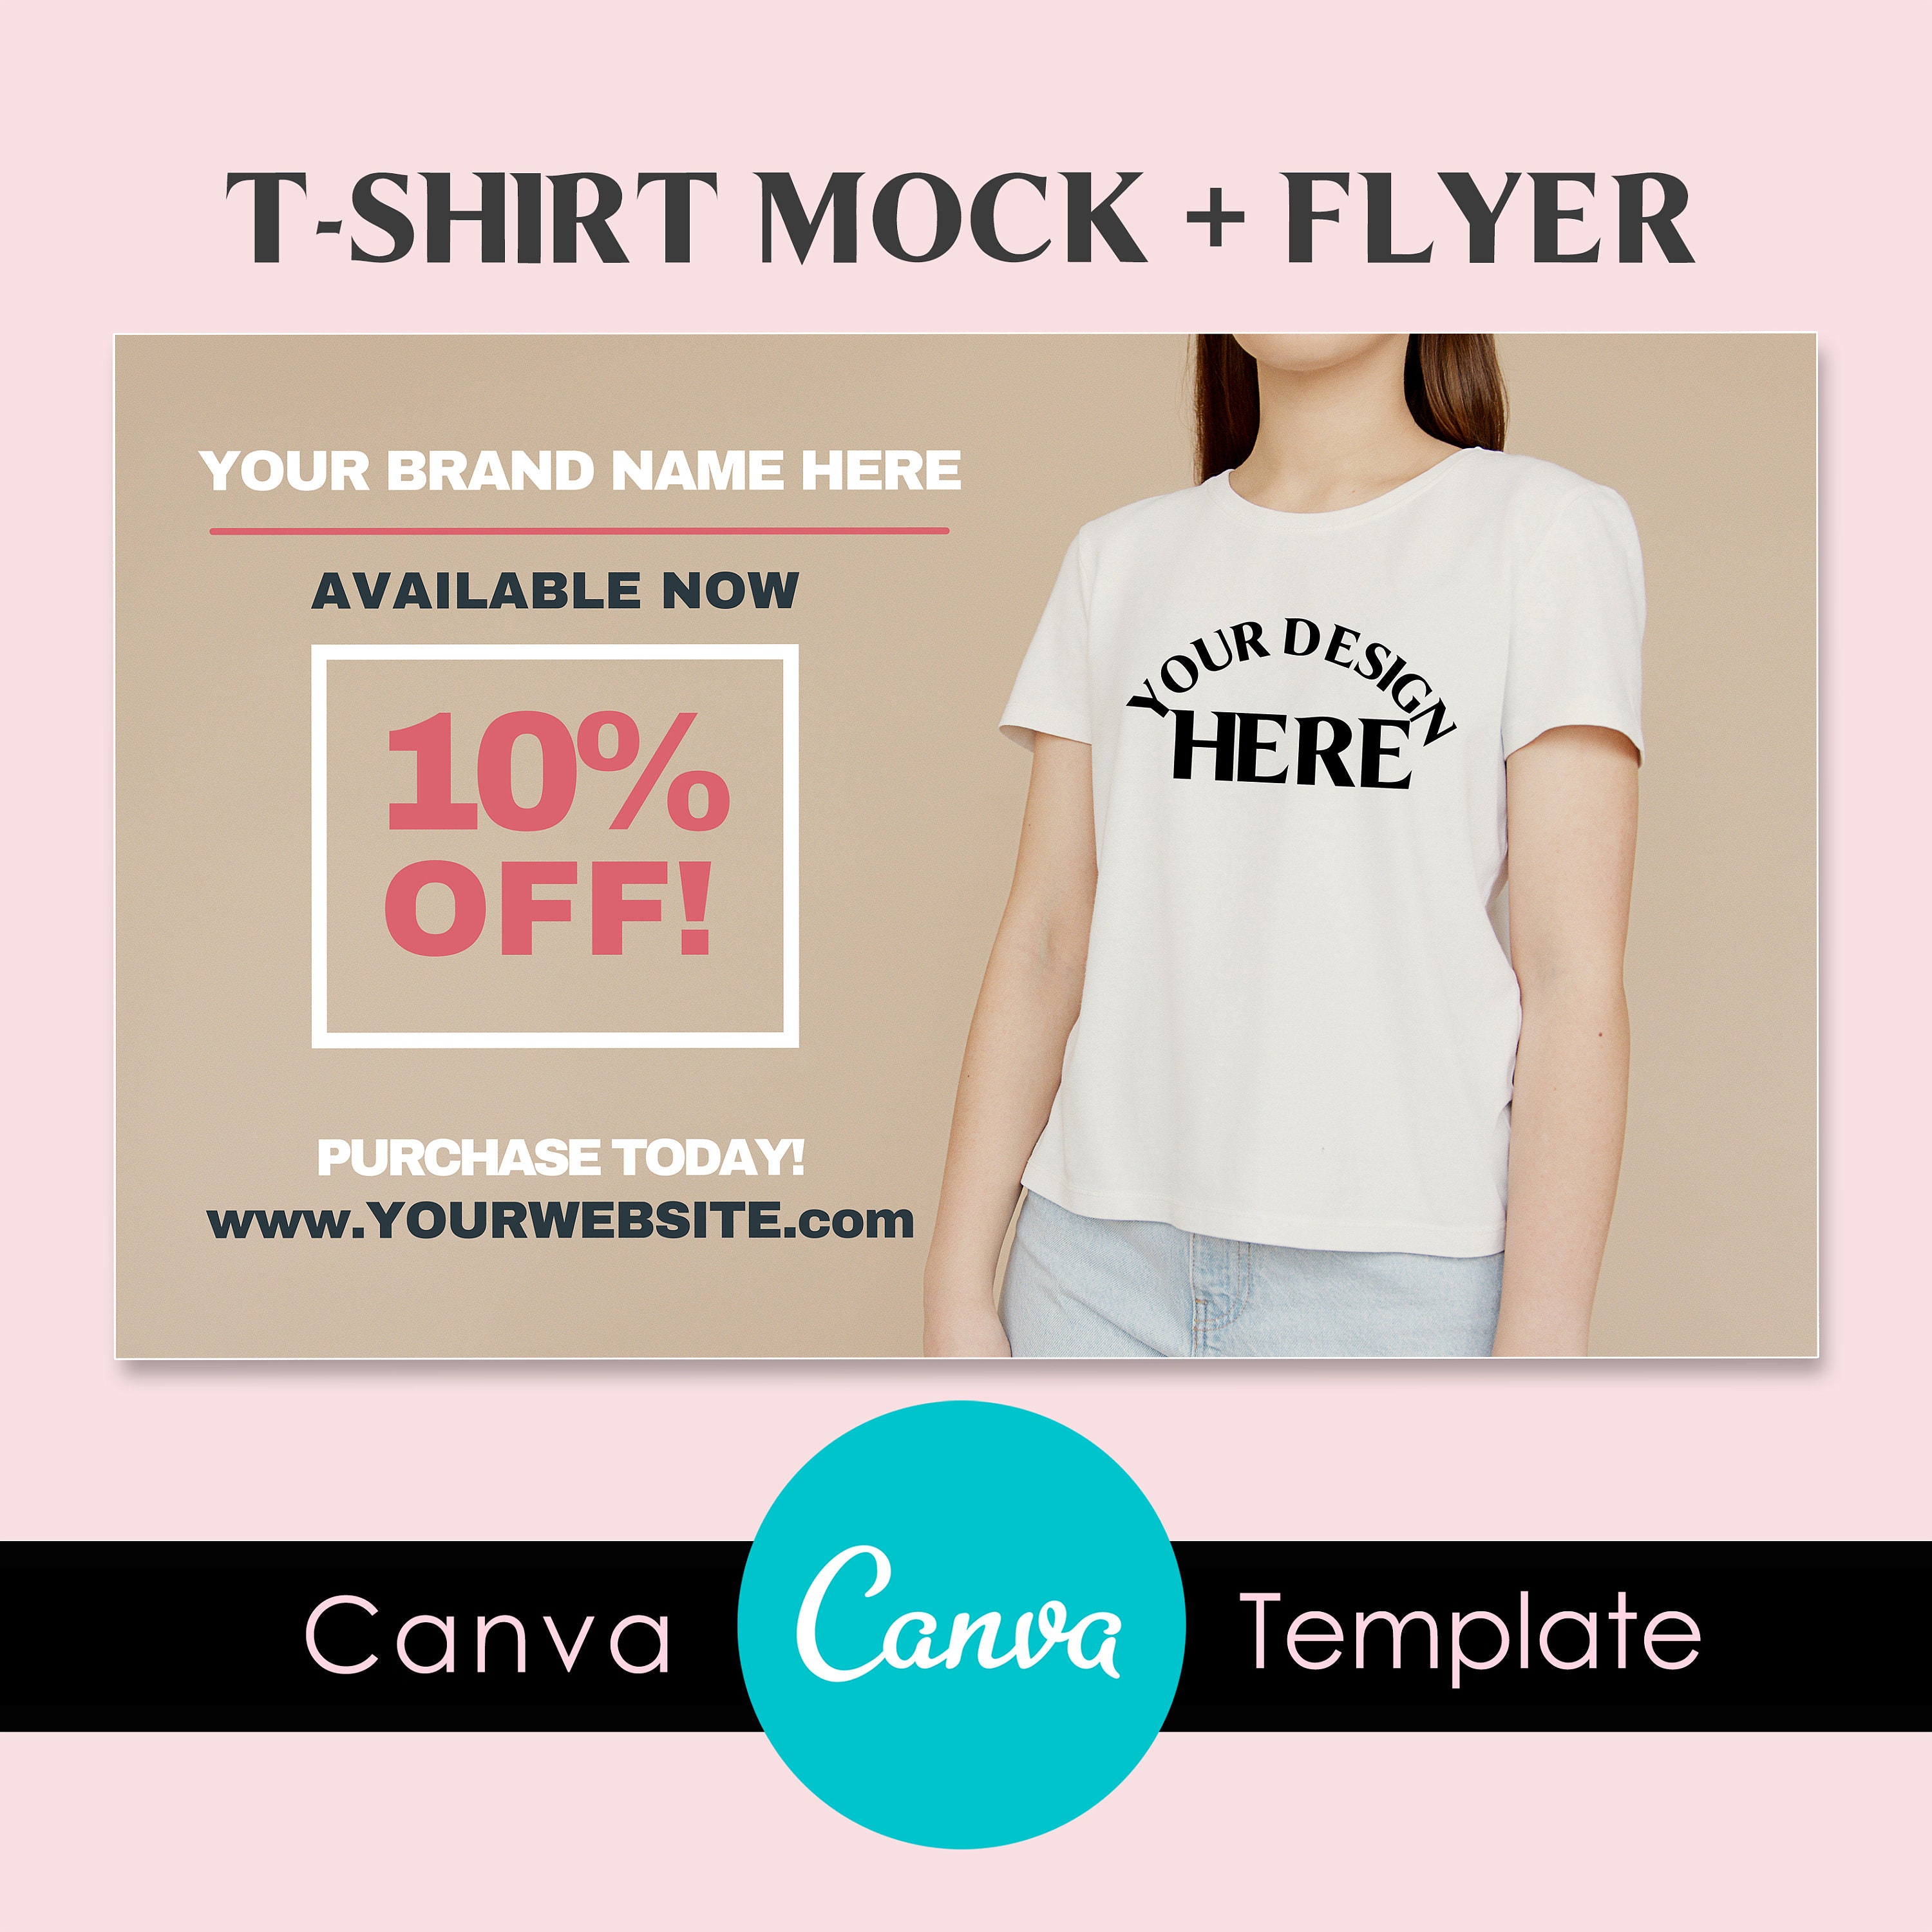 Create A T-shirt Flyer With Canva 